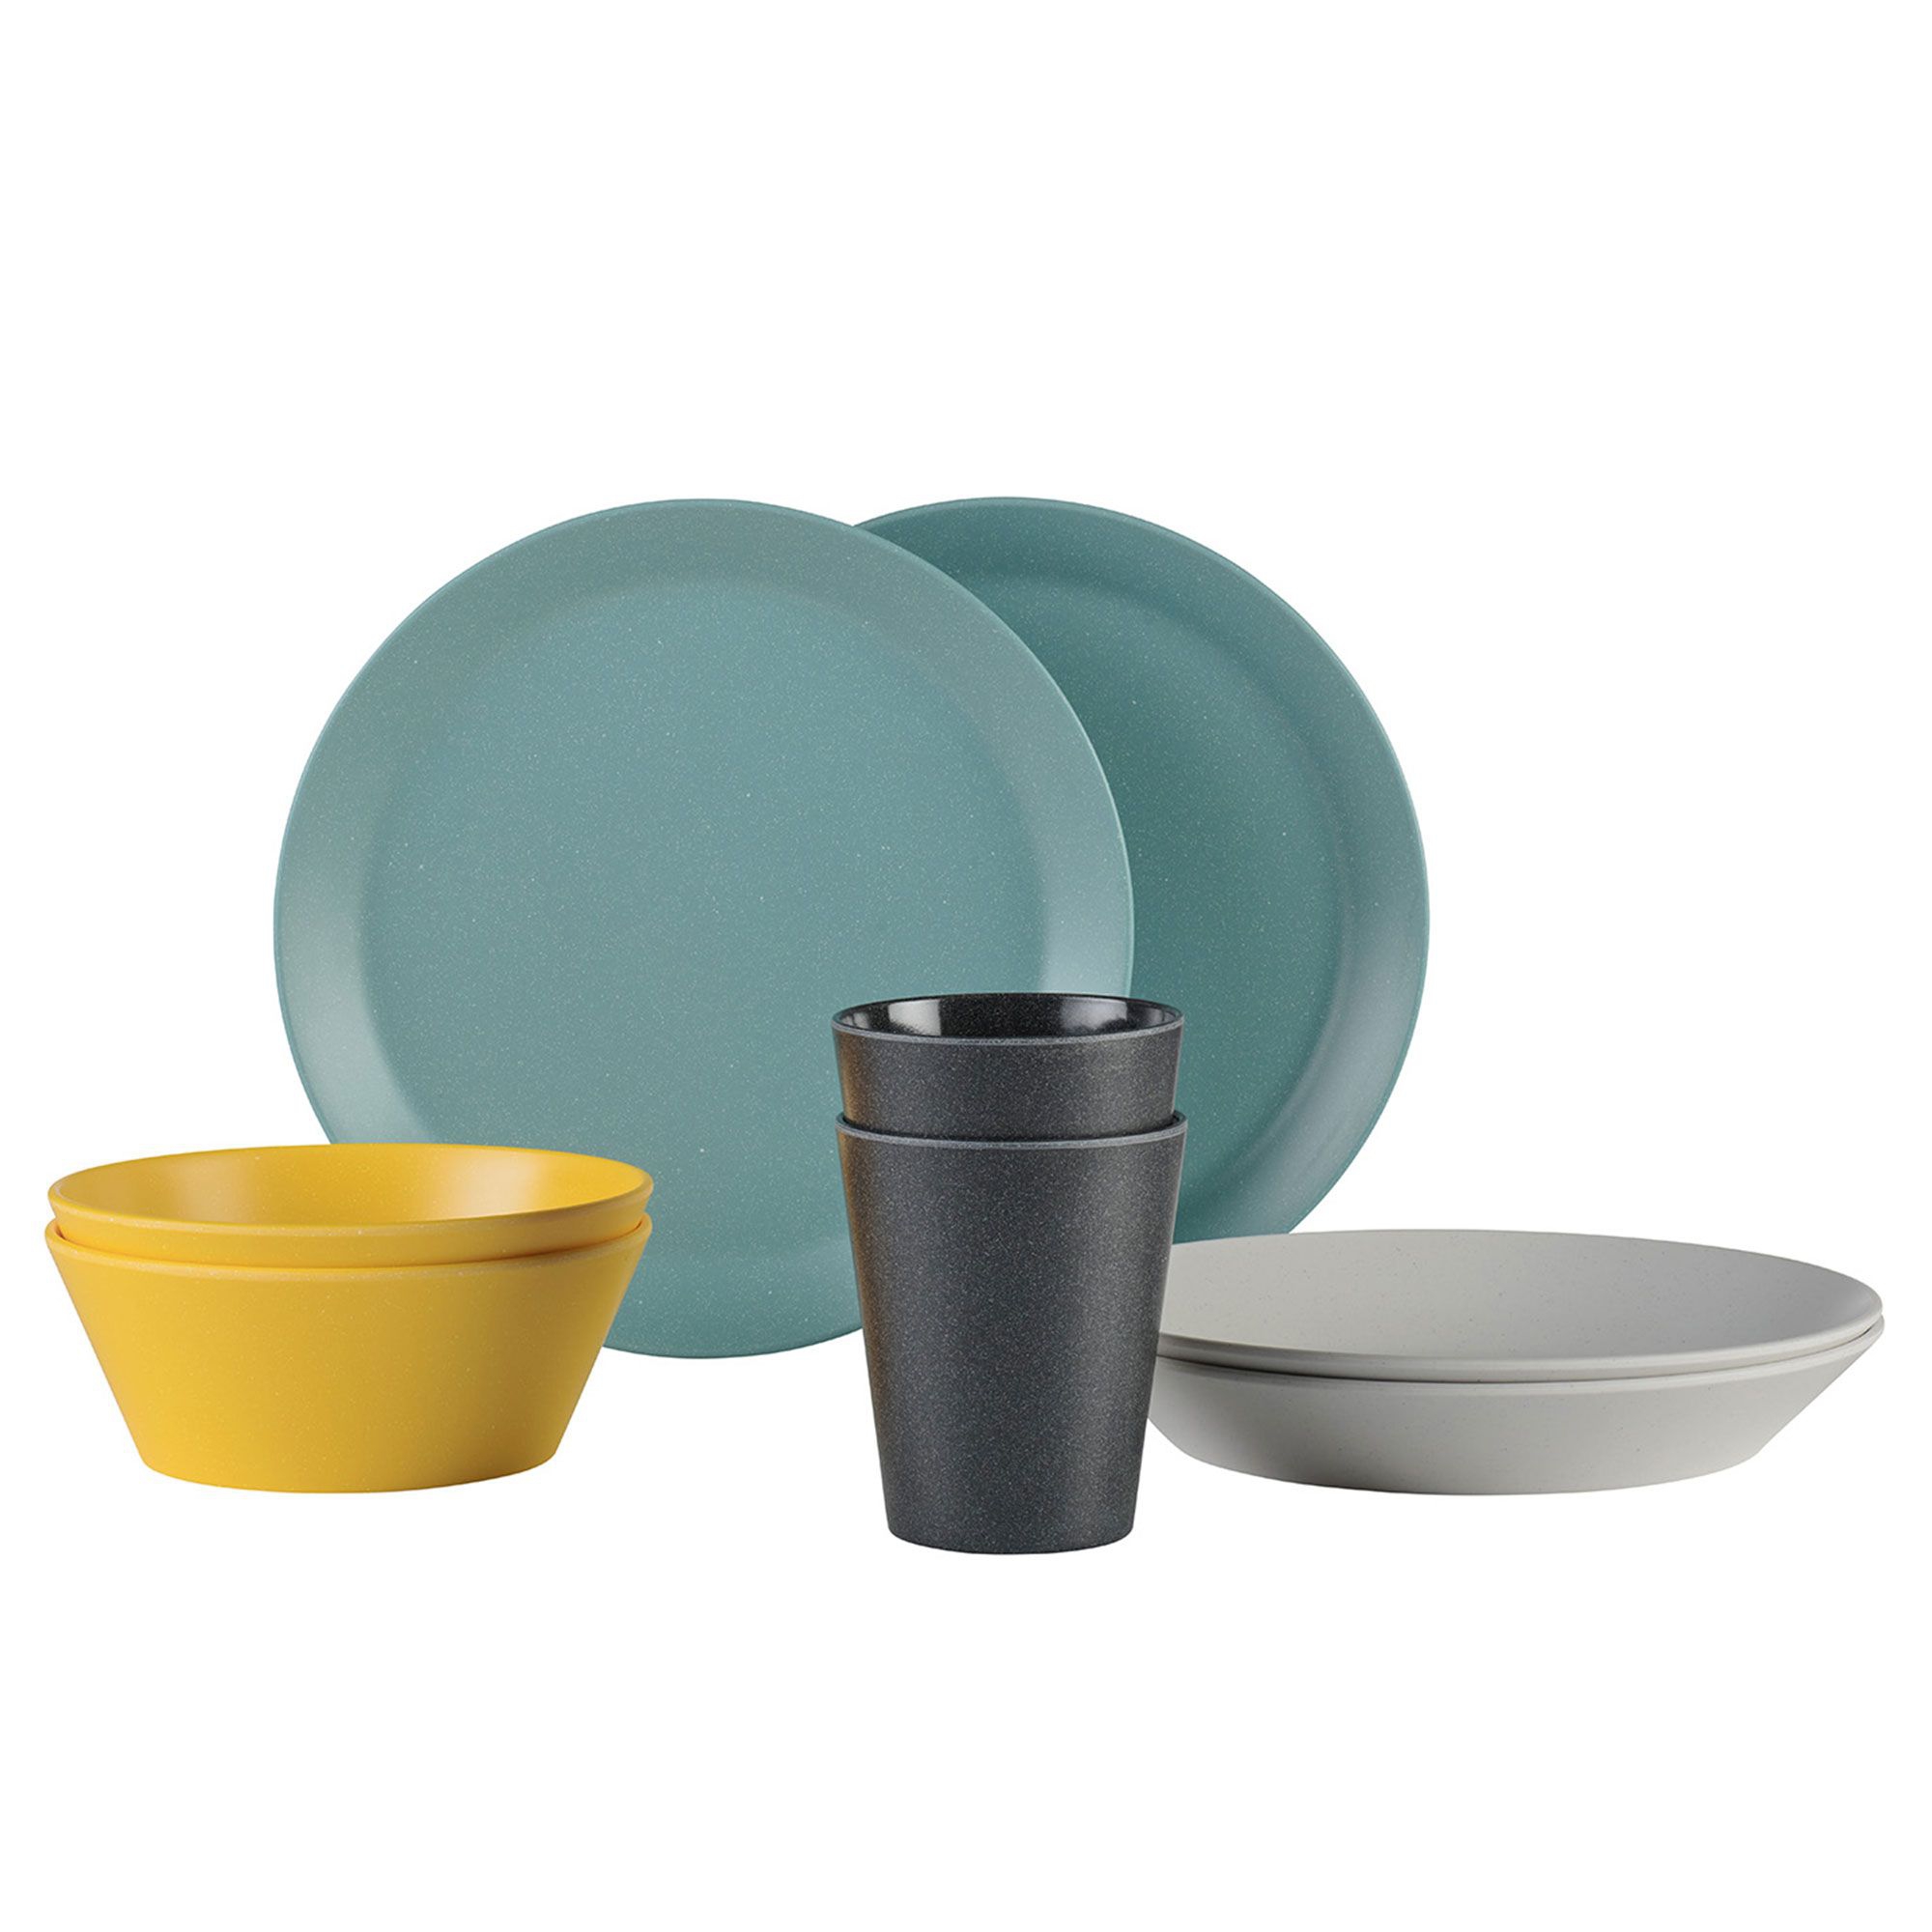 Mepal - Bloom tableware set 8 pieces  - different colors